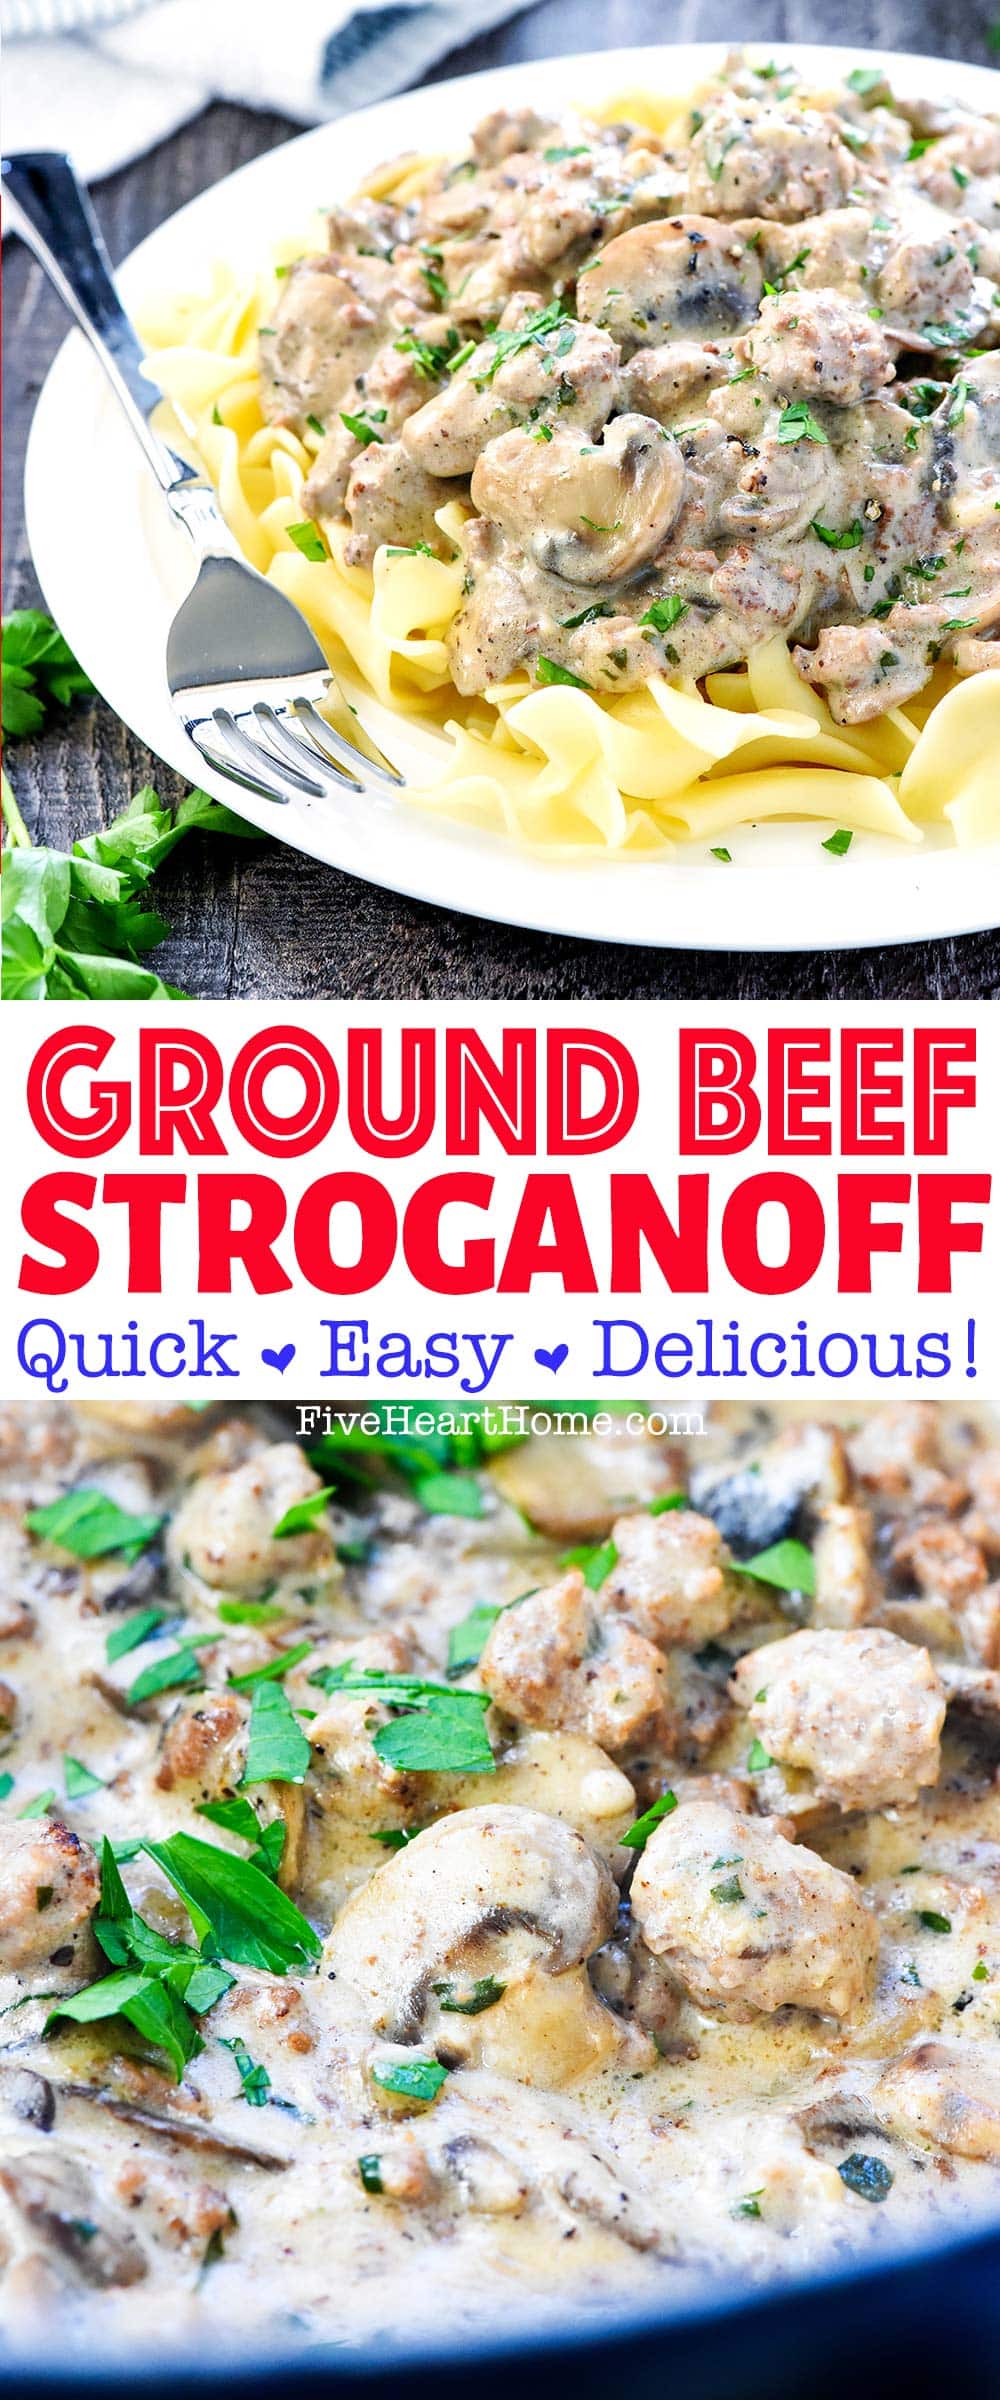 Ground Beef Stroganoff is a delicious, quick and easy version of the classic, loaded with garlicky mushrooms and finished off with a silky sour cream sauce. Making beef stroganoff with ground beef is a delicious shortcut for busy nights! | FiveHeartHome.com via @fivehearthome